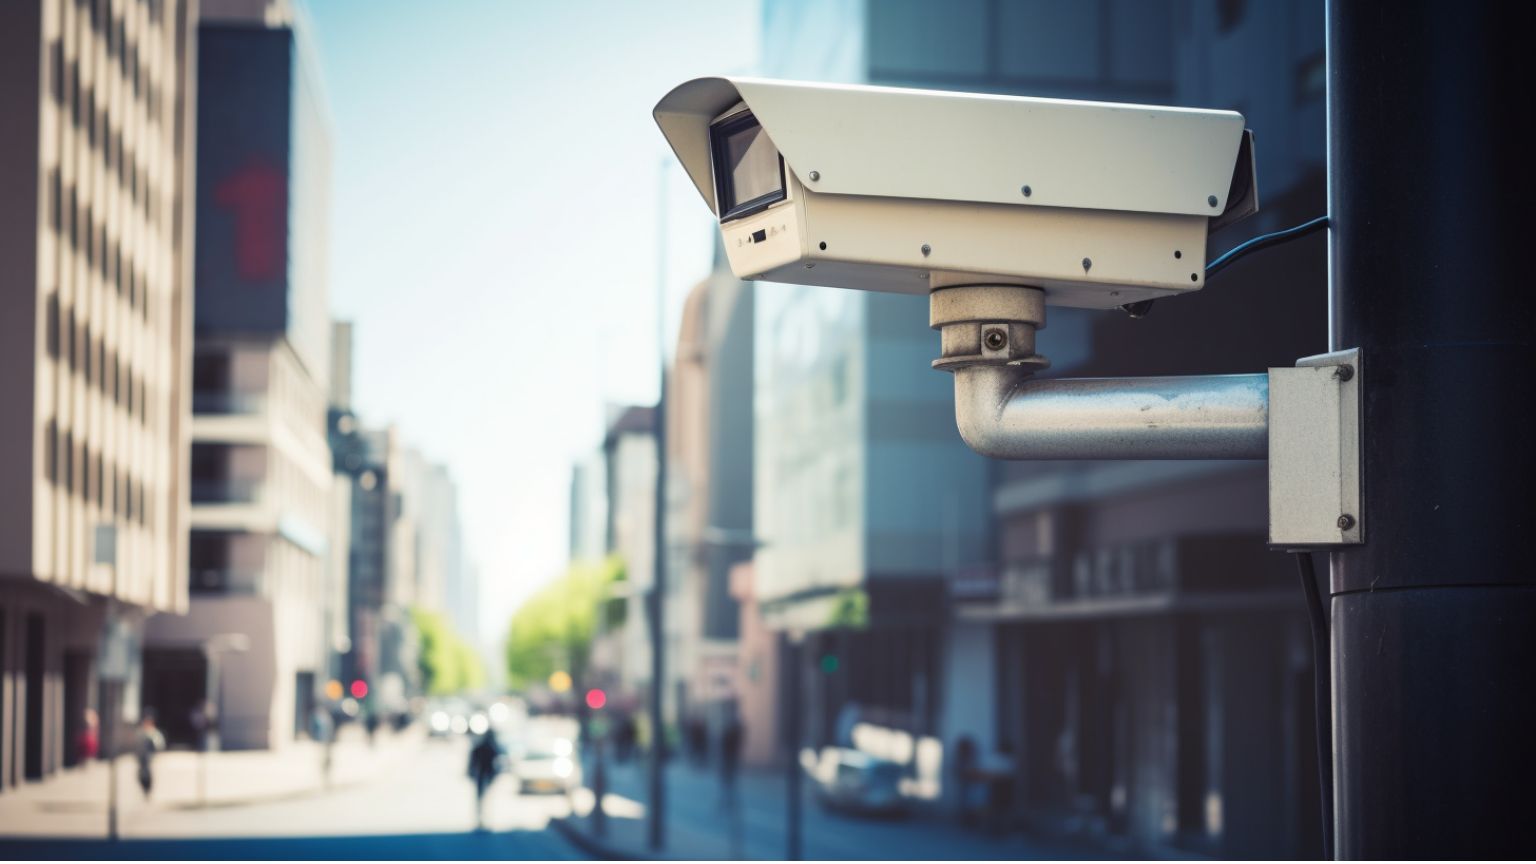 Some Private CCTV Footage Is Being Automatically Streamed to Law Enforcement